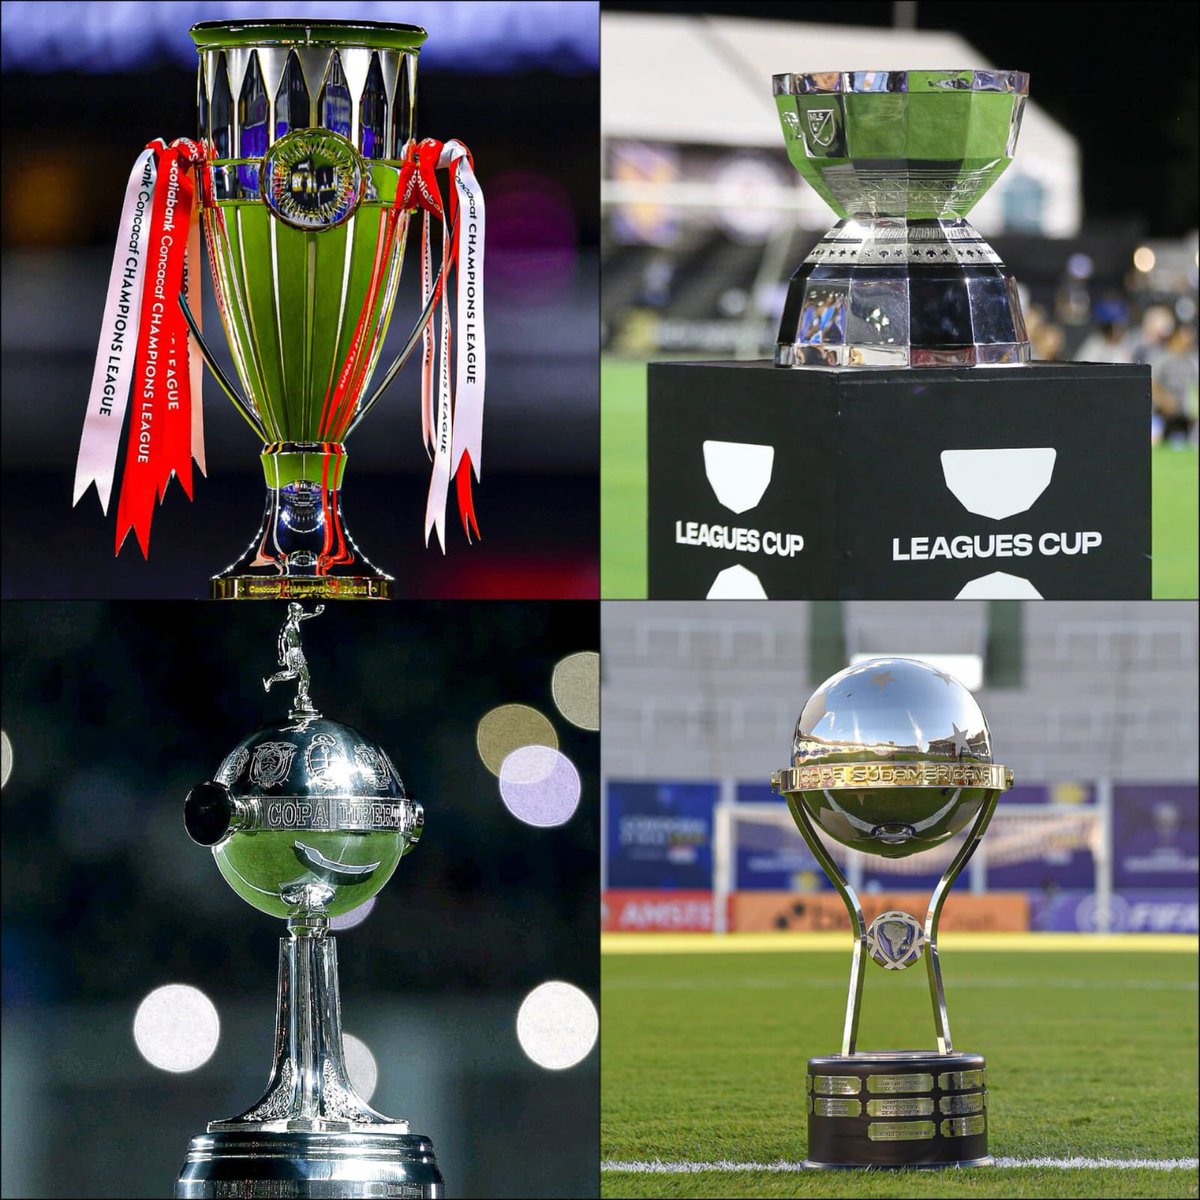 There is an agreement between CONMEBOL and CONCACAF so that the Inter-American Cup returns in 2024. This time as a home run: 🔹Copa Libertadores Champion 2023. 🔹South American Cup Champion 2023. 🔹Concachampions Champion 2023. 🔹Champion of Leagues Cup 2023. [@DiarioOle]